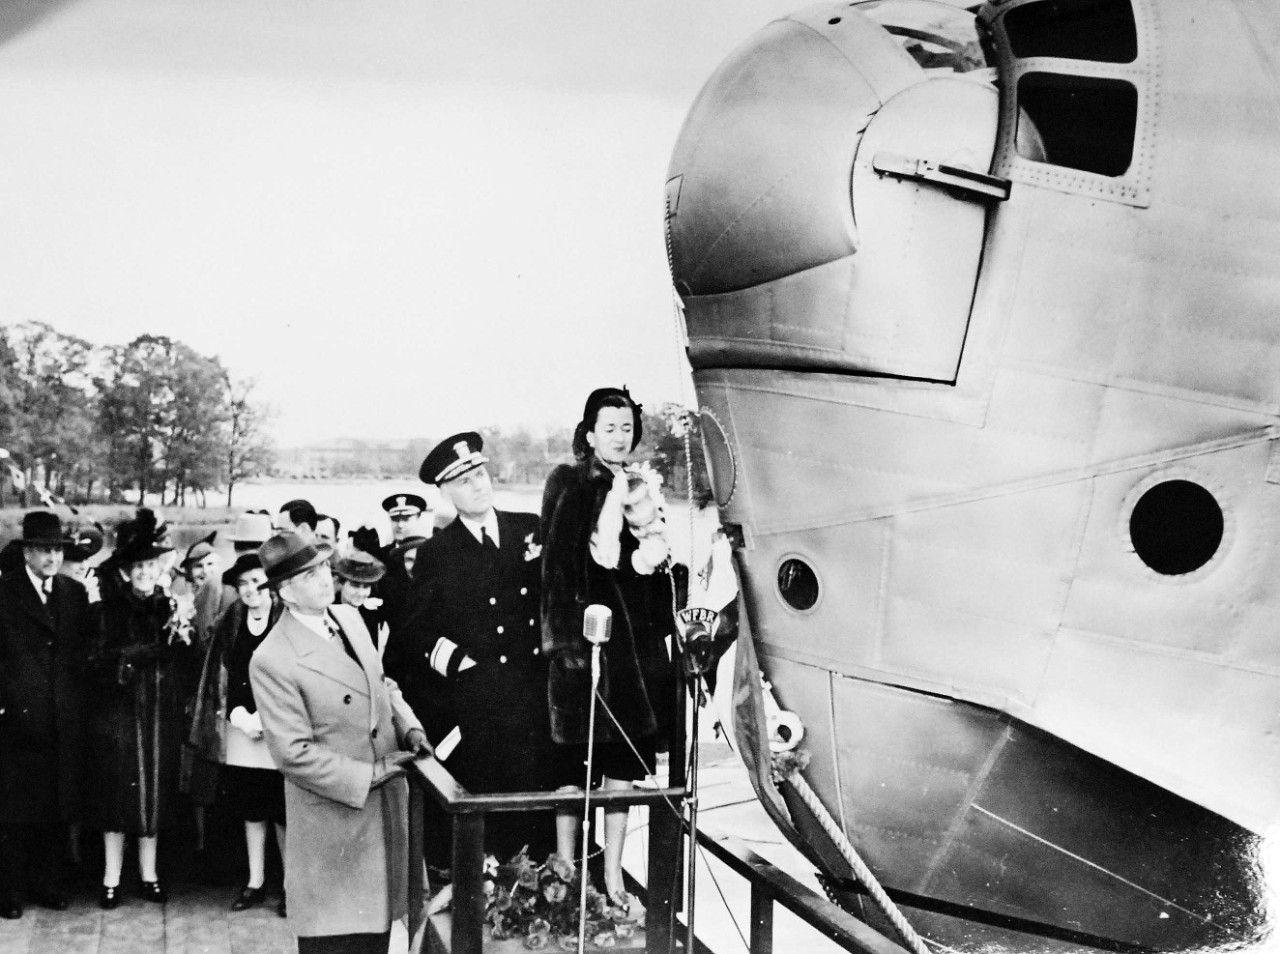 LC-Lot-9827-6: Martin JRM “Mars” aircraft, XPB2M-1, 1941. The giant aircraft was the first flying boat launched with full Naval ceremony, November 8, 1941. Shown: Mrs. Artemus L. Gates, whose husband at that time was Assistant Secretary of the Navy for Air, is about to smash the traditional bottle on the nose of the ship. Looking on are Admiral John H. Towers and Glenn L. Martin. Album from The Glenn L. Martin Company, Baltimore, Maryland, 1941. Courtesy of the Library of Congress. 